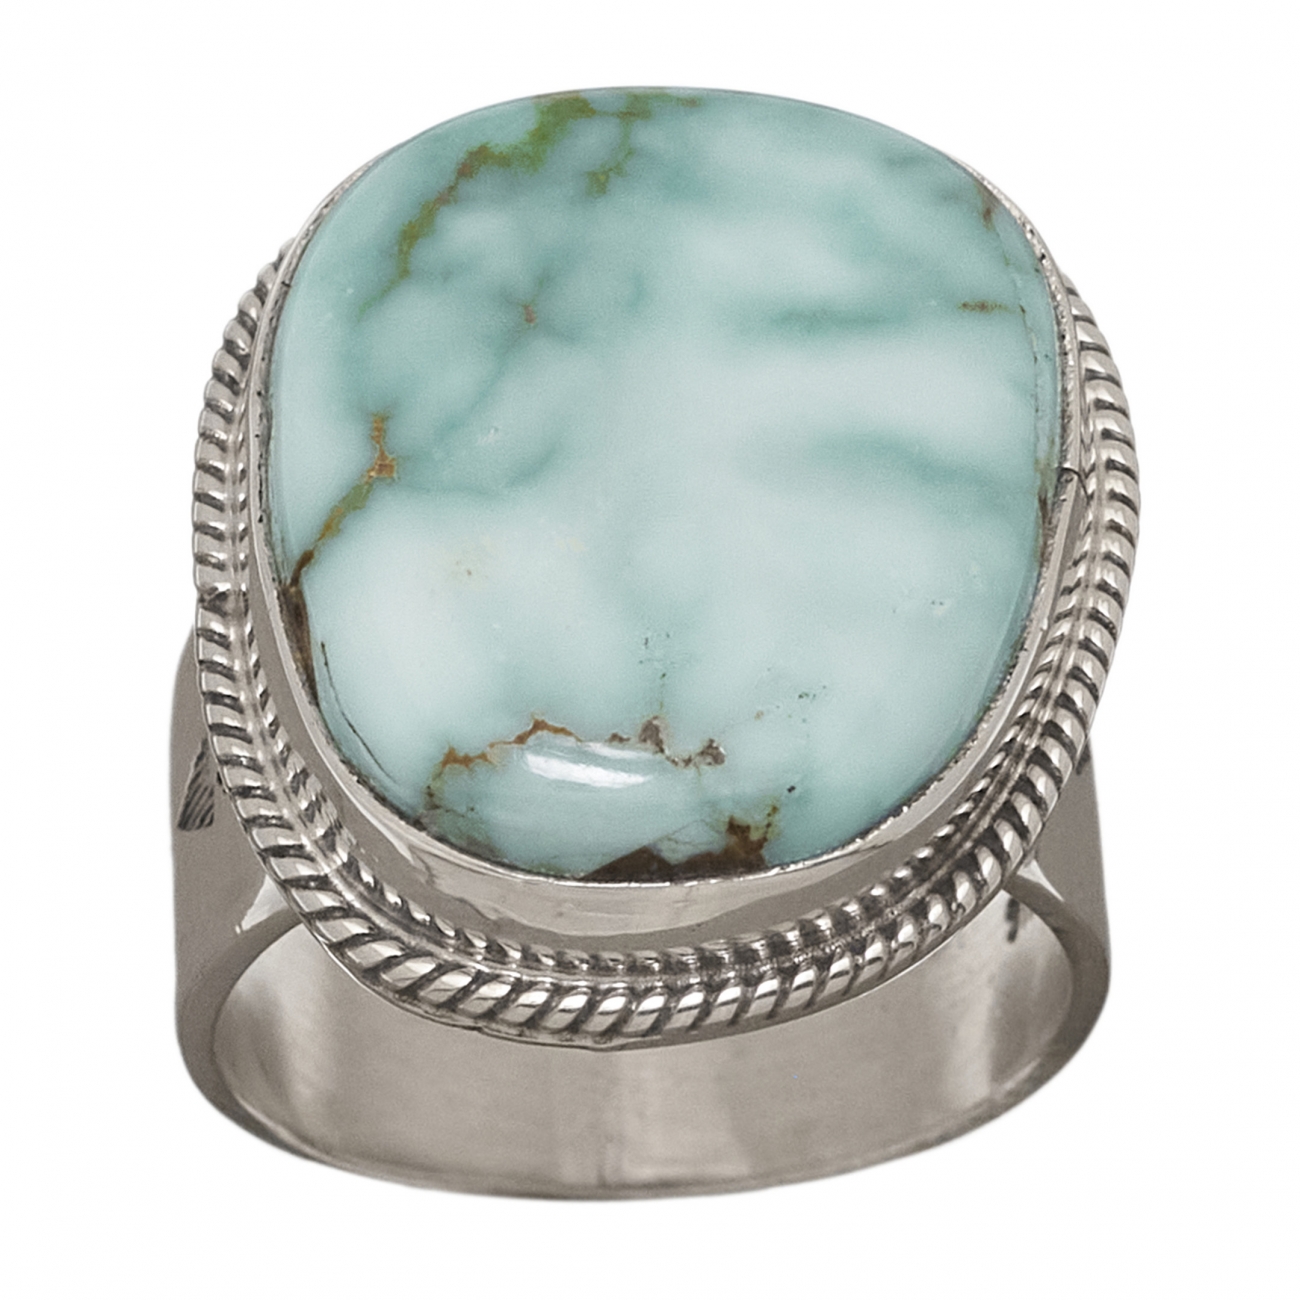 Navajo ring for men BA1196 in turquoise and silver - Harpo Paris